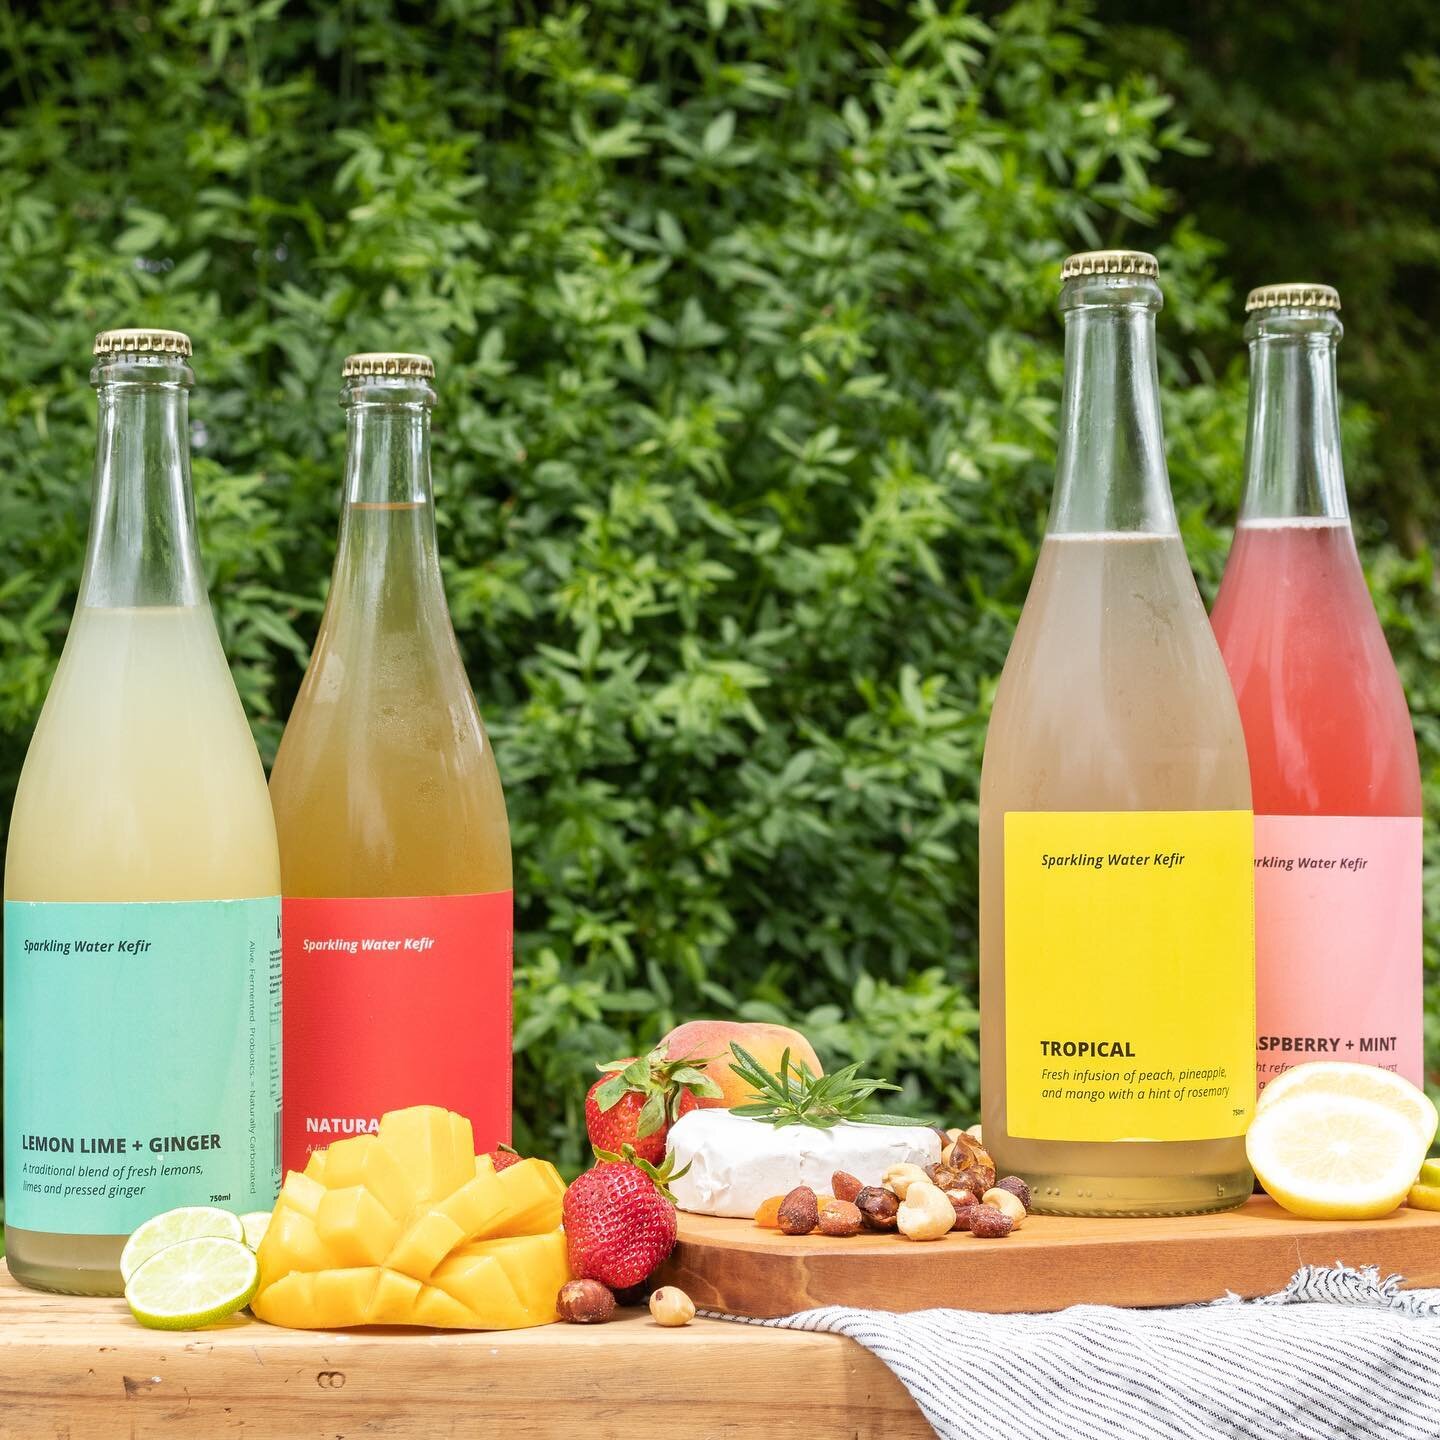 Have you tried our refreshing Sparkling Water Kefir drinks yet? 🥥🍋🍍🥭🍑 

Each bottle is handmade using locally sourced ingredients combined with our coconut kefir to create a natural, fruity and deliciously thirst quenching drink &ndash; get your